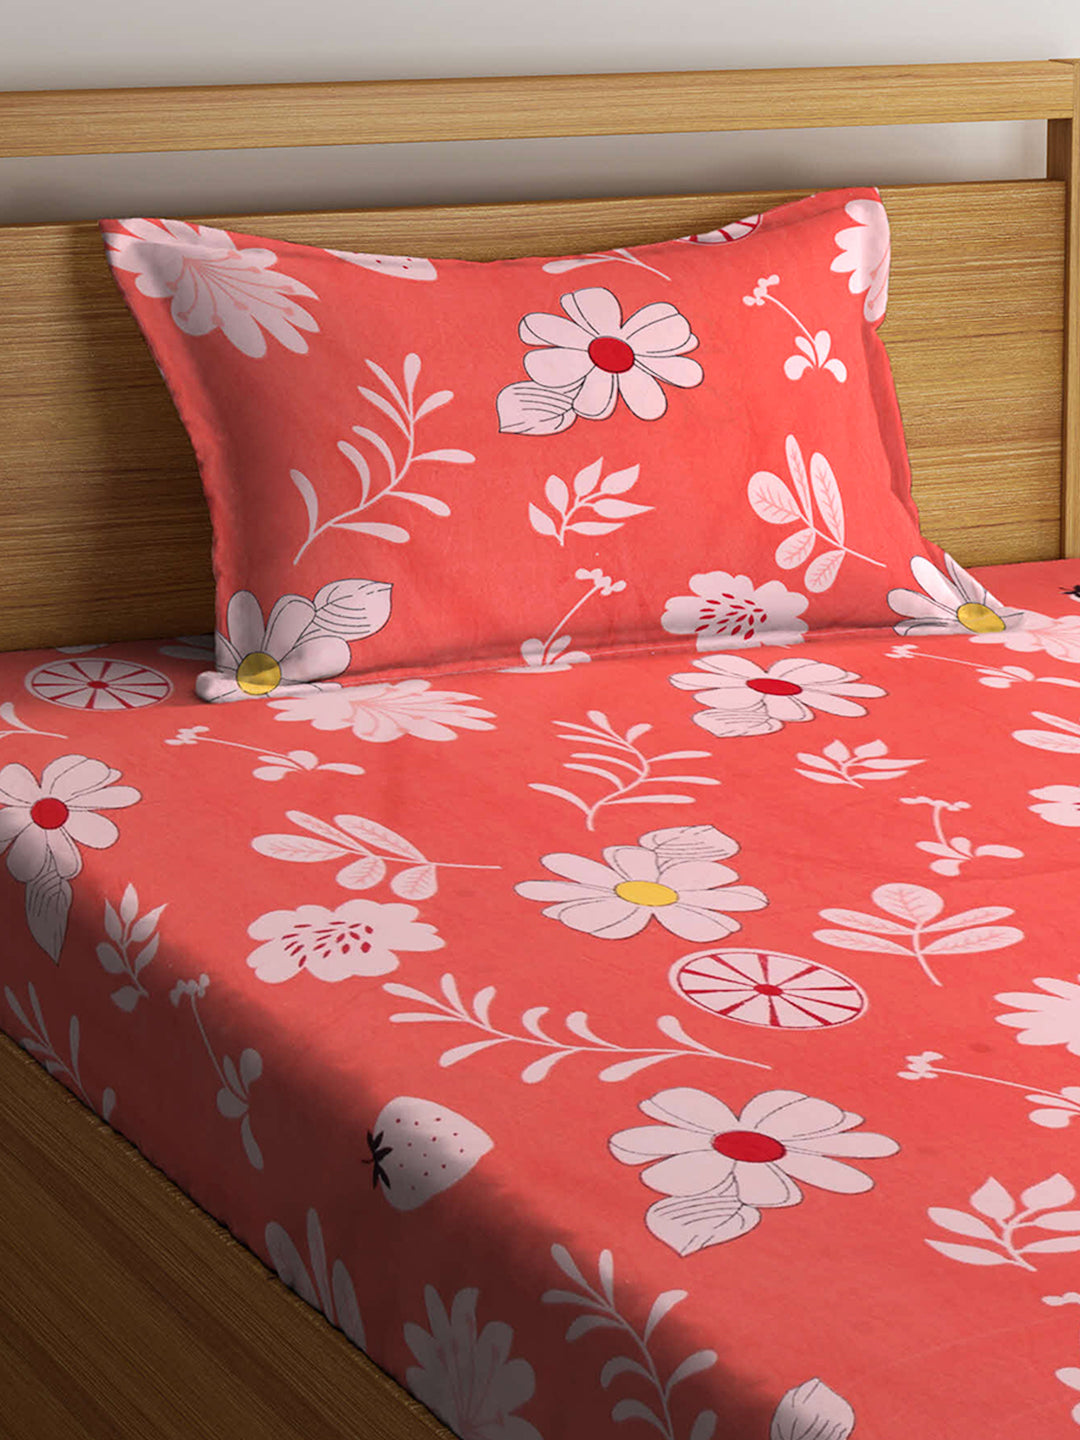 Arrabi Orange Floral TC Cotton Blend Single Size Fitted Bedsheet with 1 Pillow Cover (220 X 150 cm)